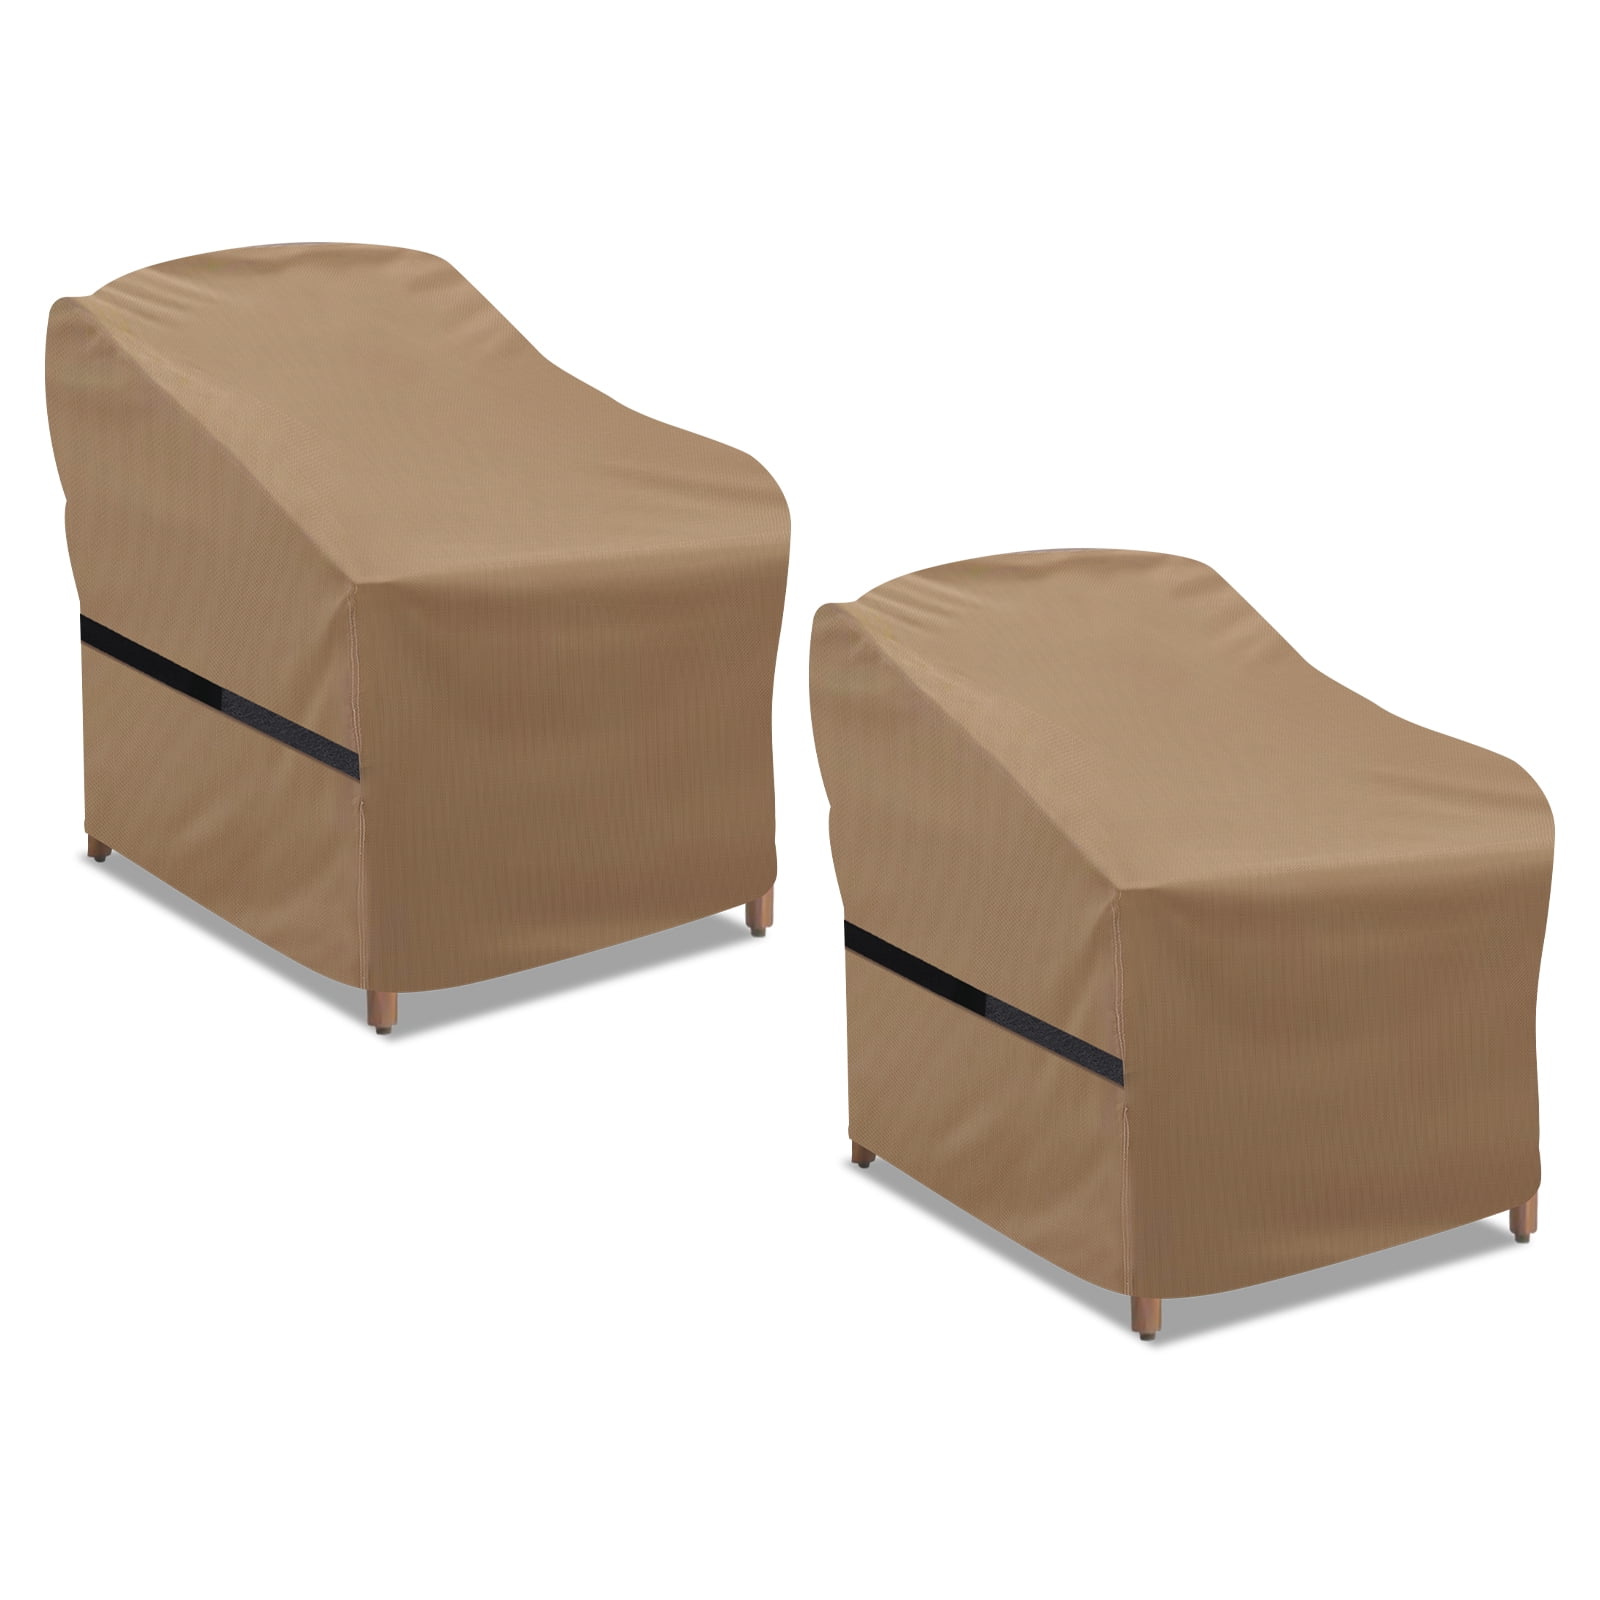 2 Pack Asinking Patio Chair Covers for Outdoor Furniture Patio Furniture Cover for Lounge Deep Seat Khaki/Brown 30 W x 37 D x 31 H 100% Waterproof Heavy Duty Outdoor Chair Covers 